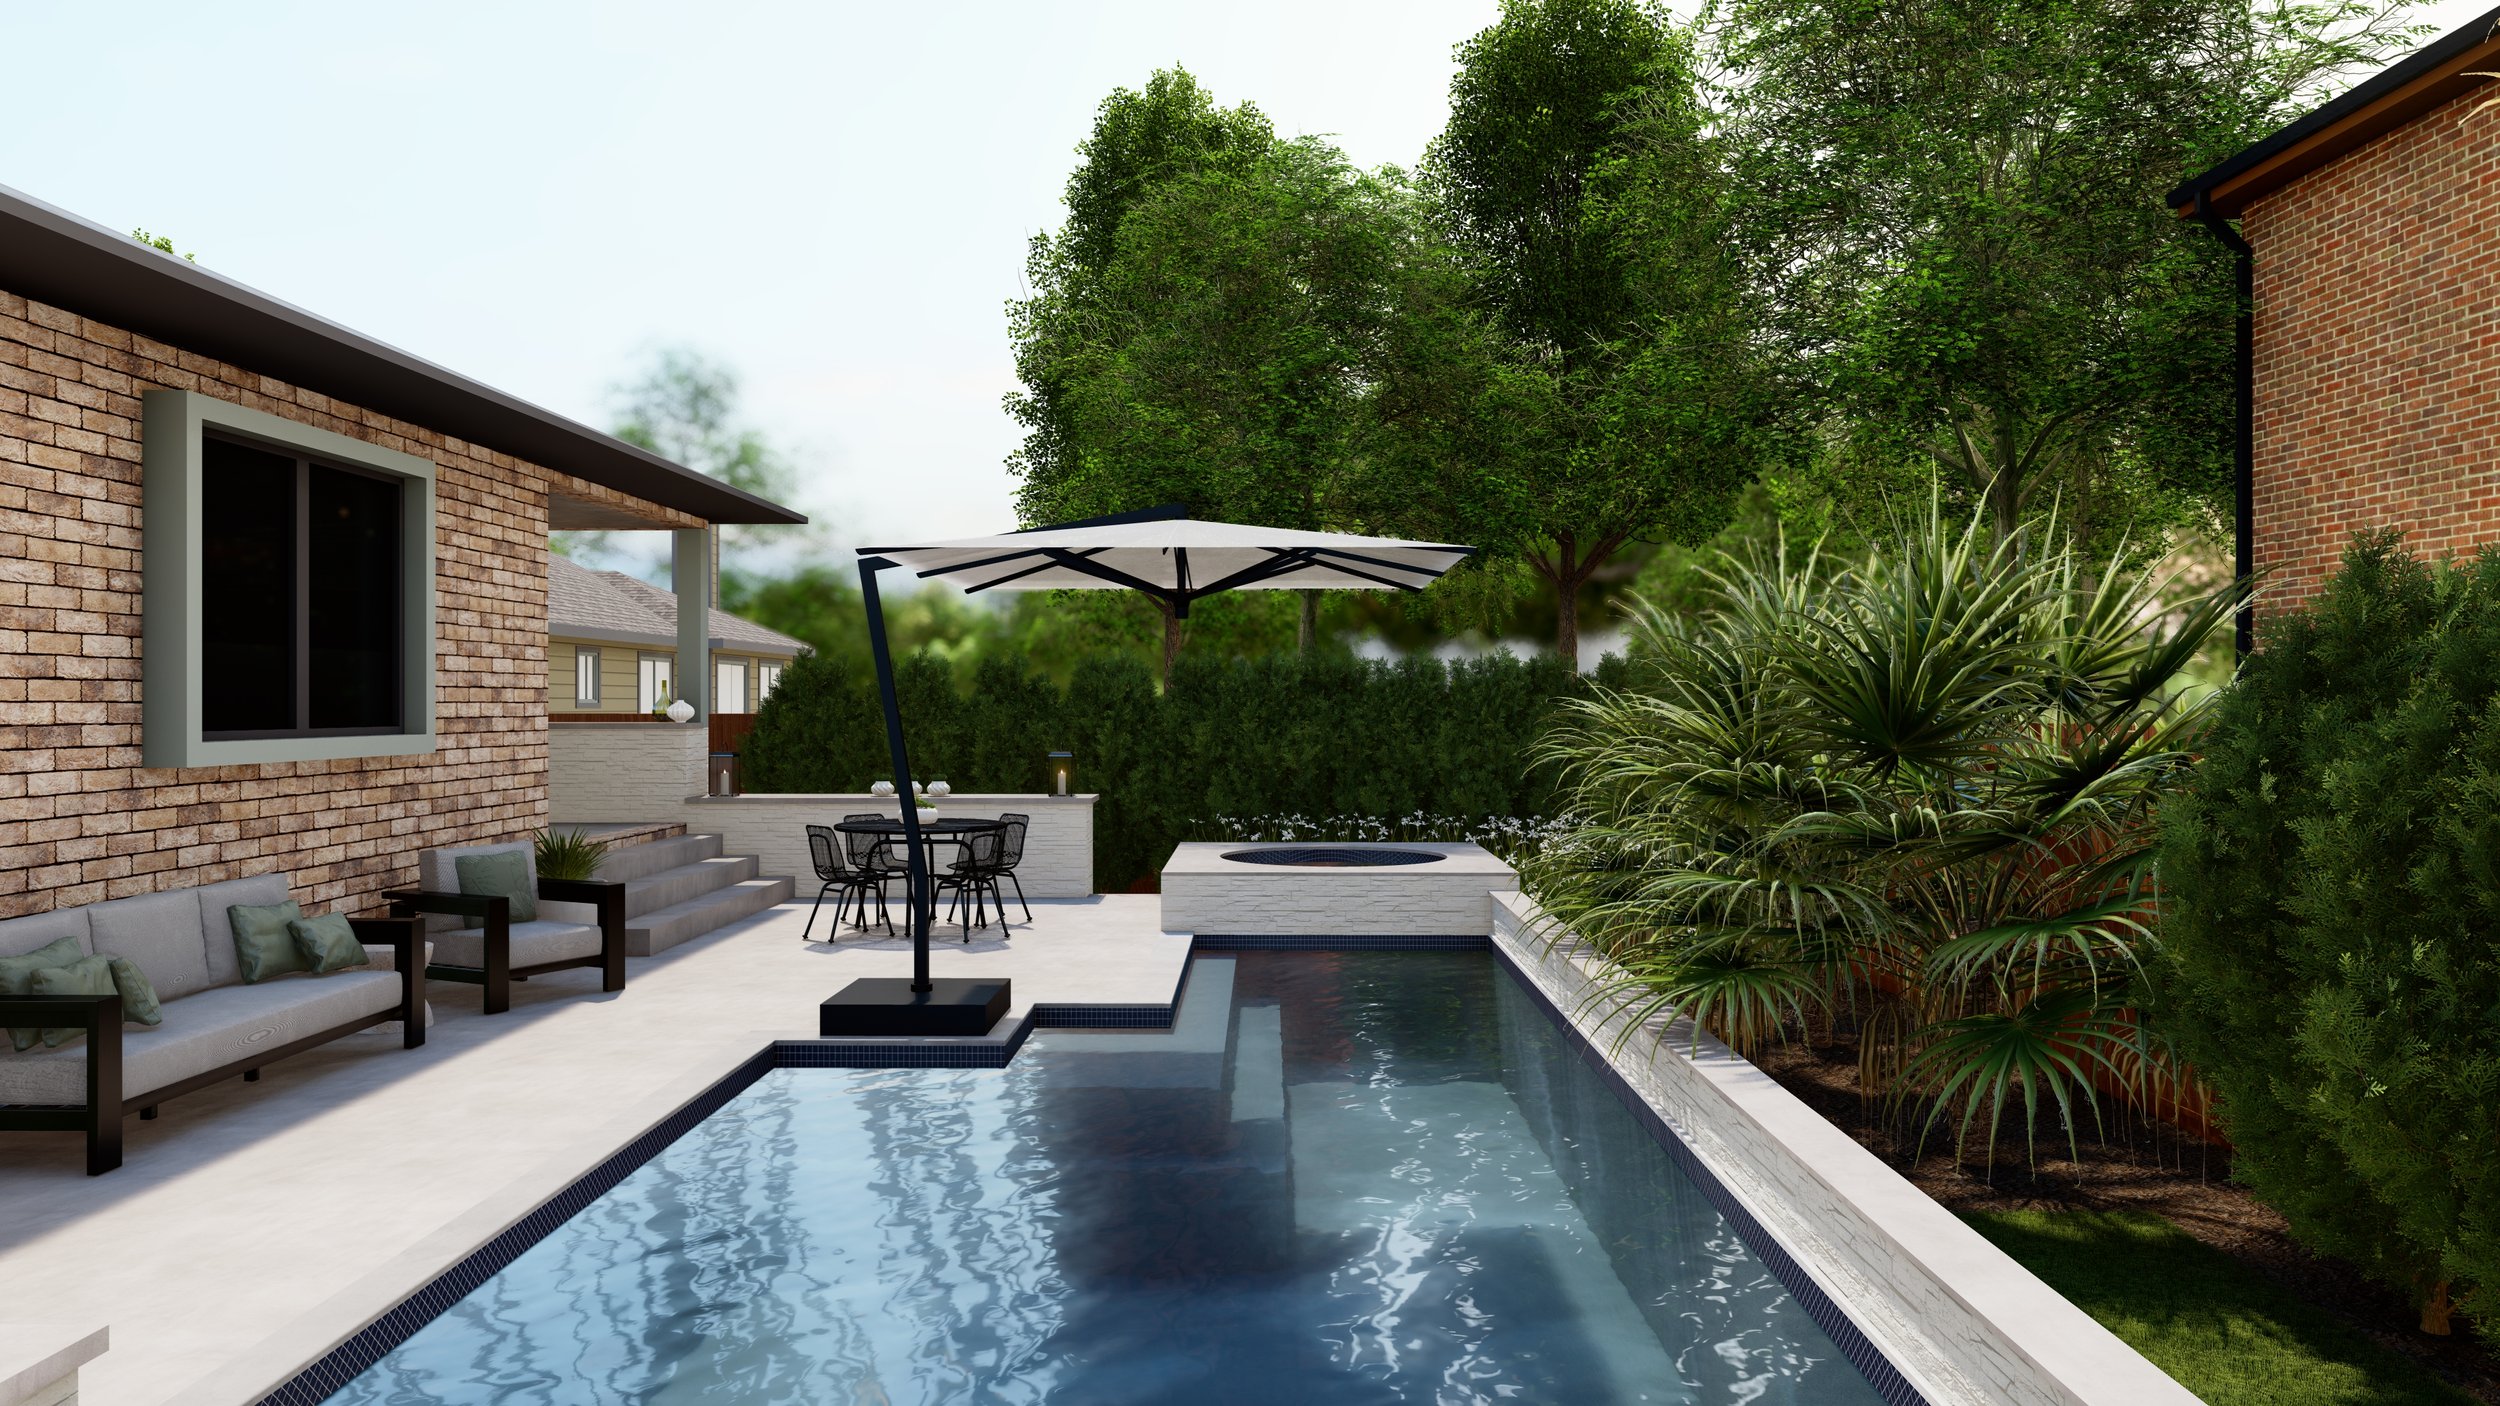 Pool with umbrella and poolside metal outdoor sofa and longe chair.